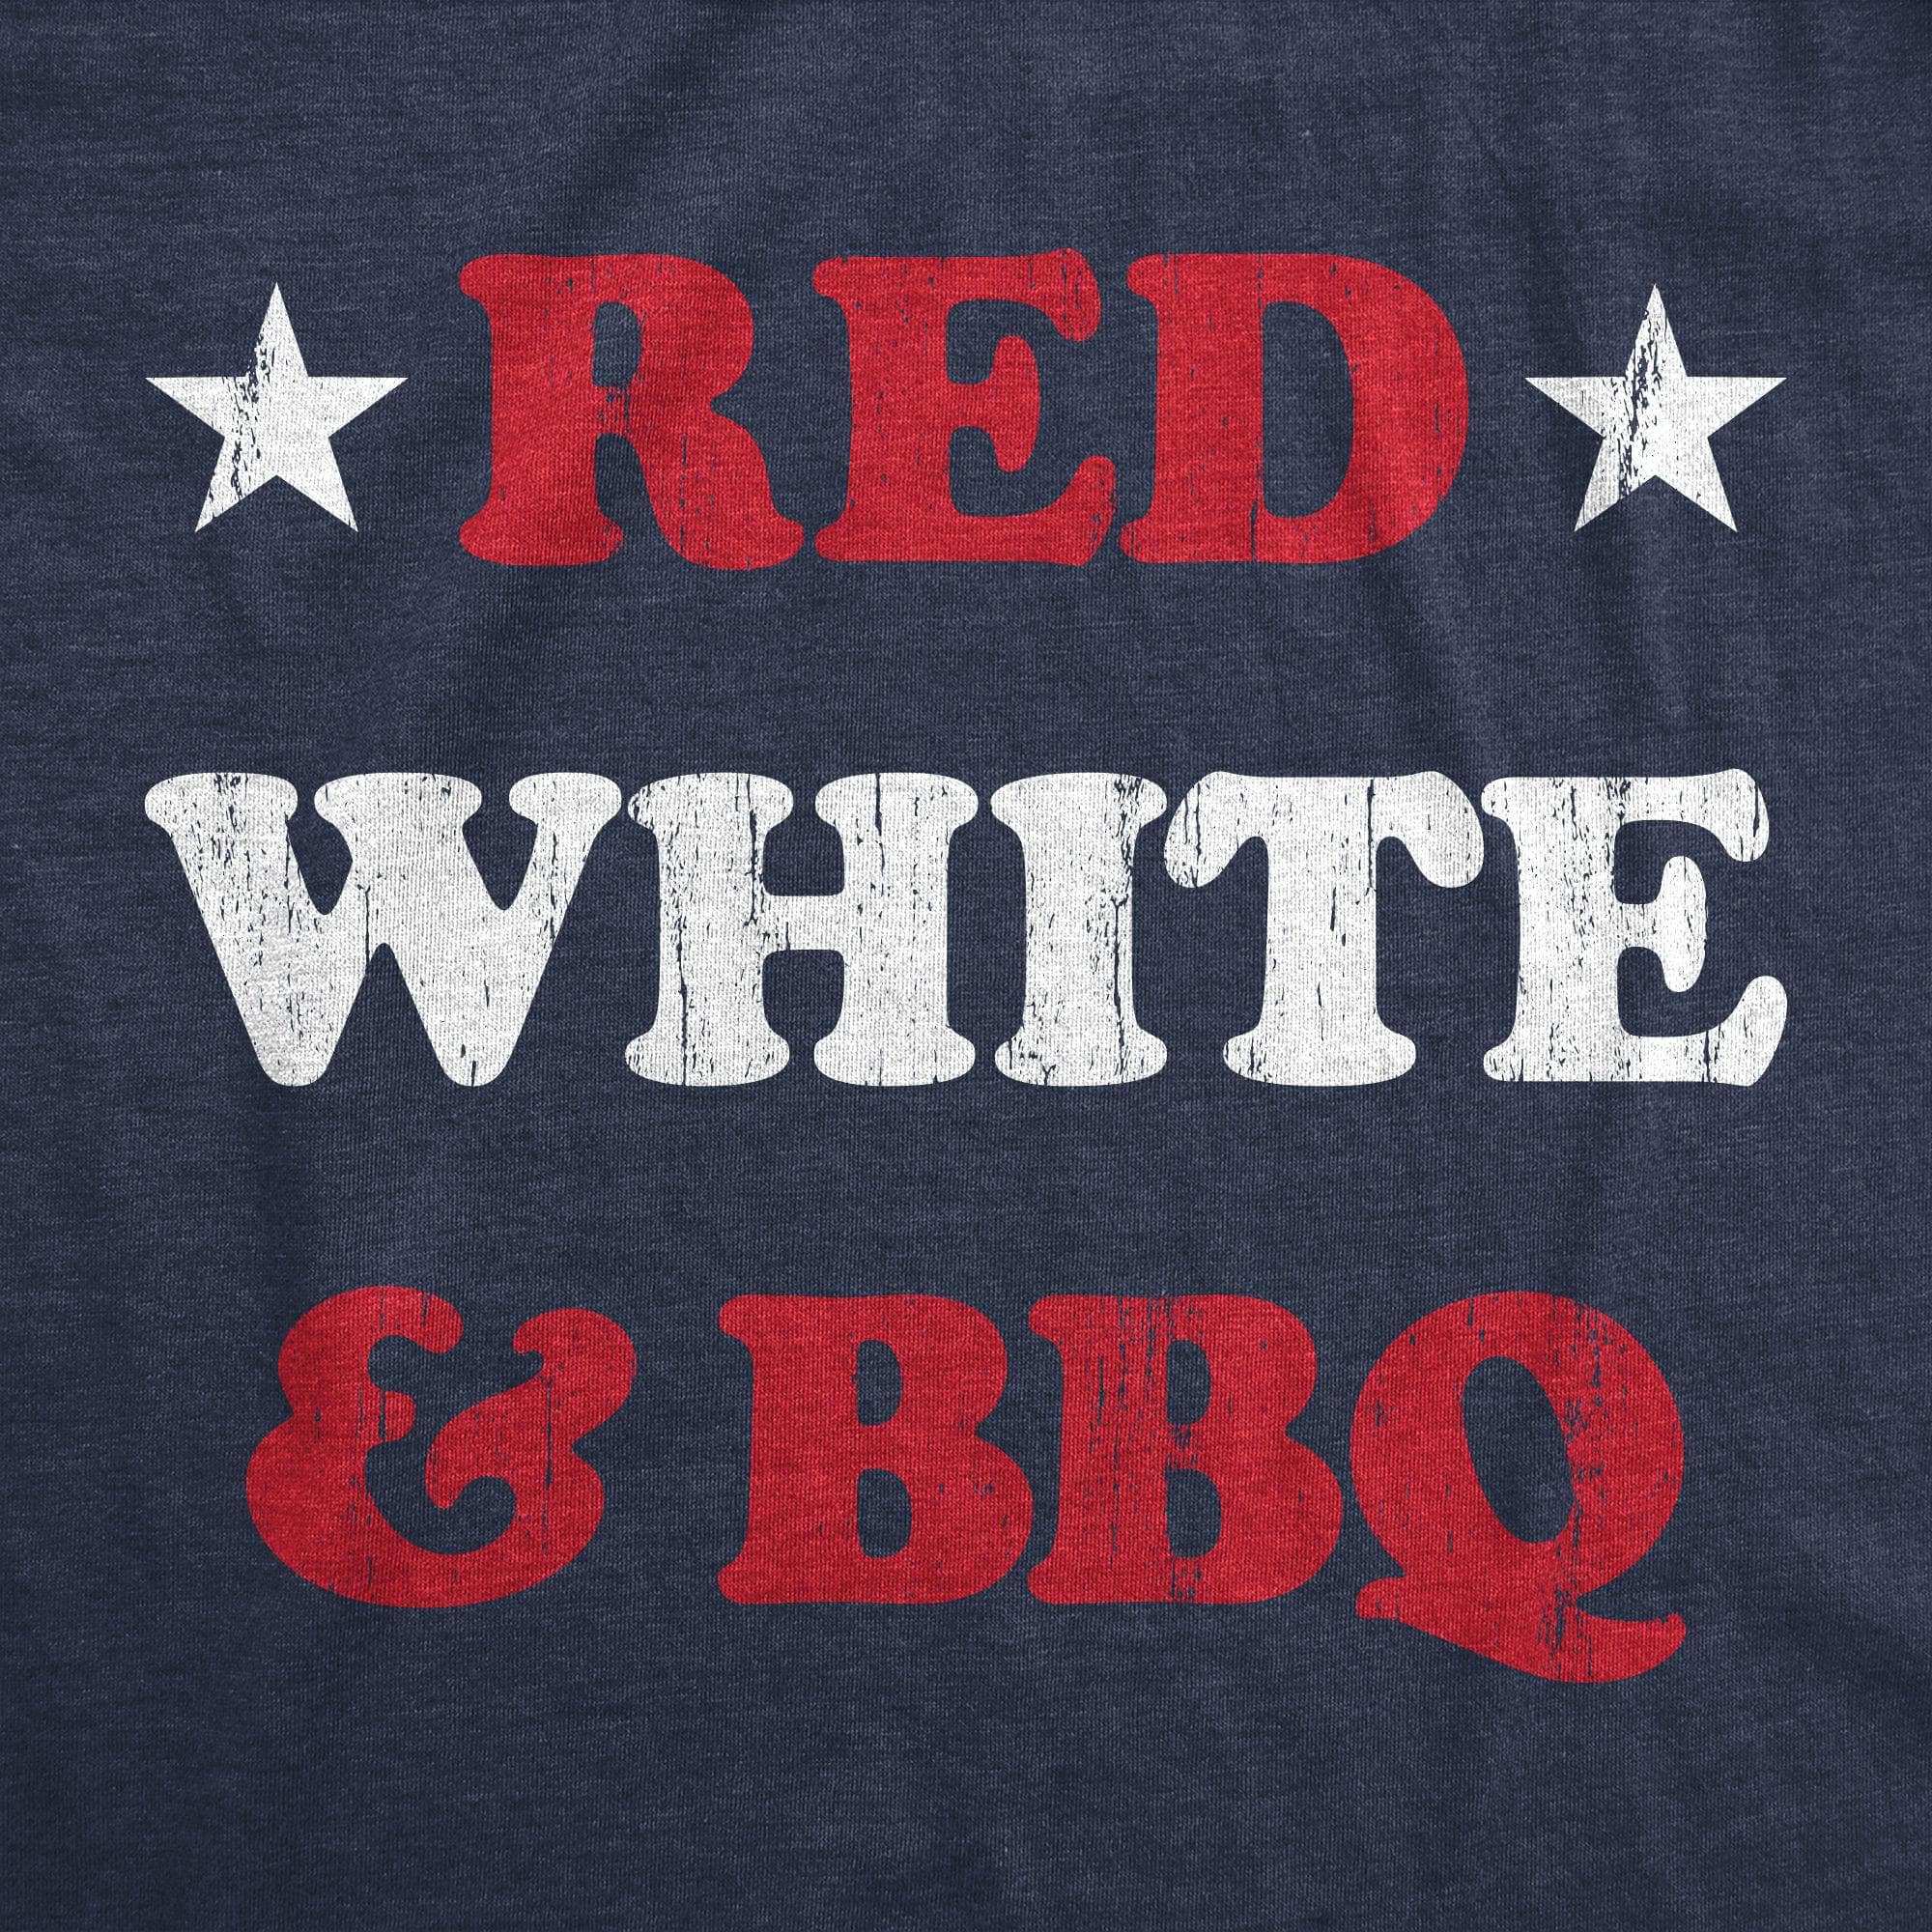 Red White And BBQ Women's Tank Top  -  Crazy Dog T-Shirts